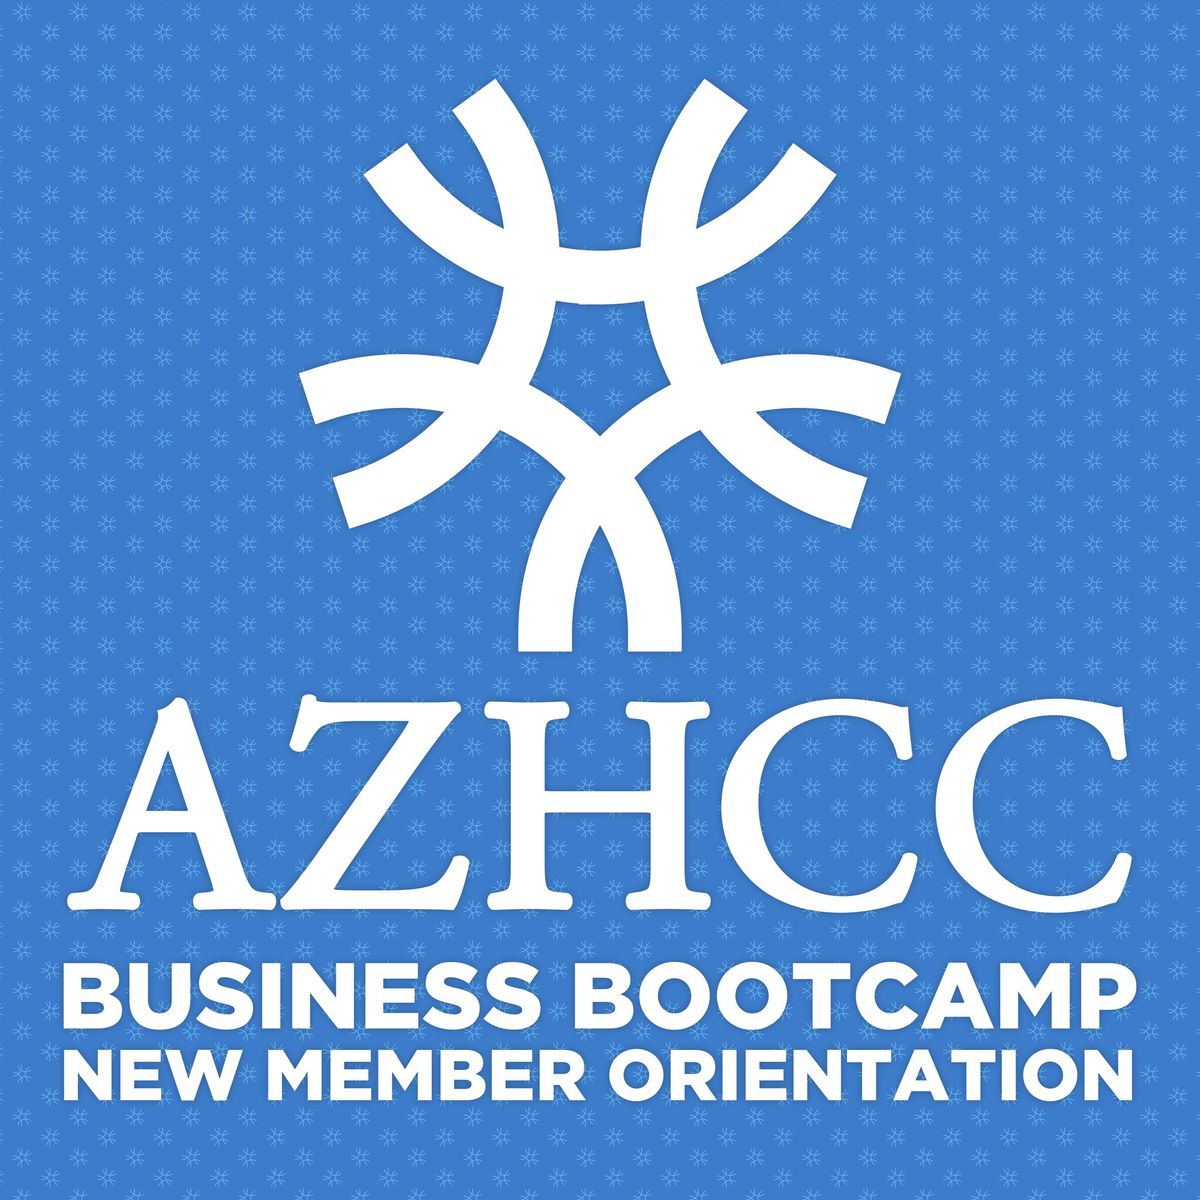 Business Bootcamp & Member Orientation